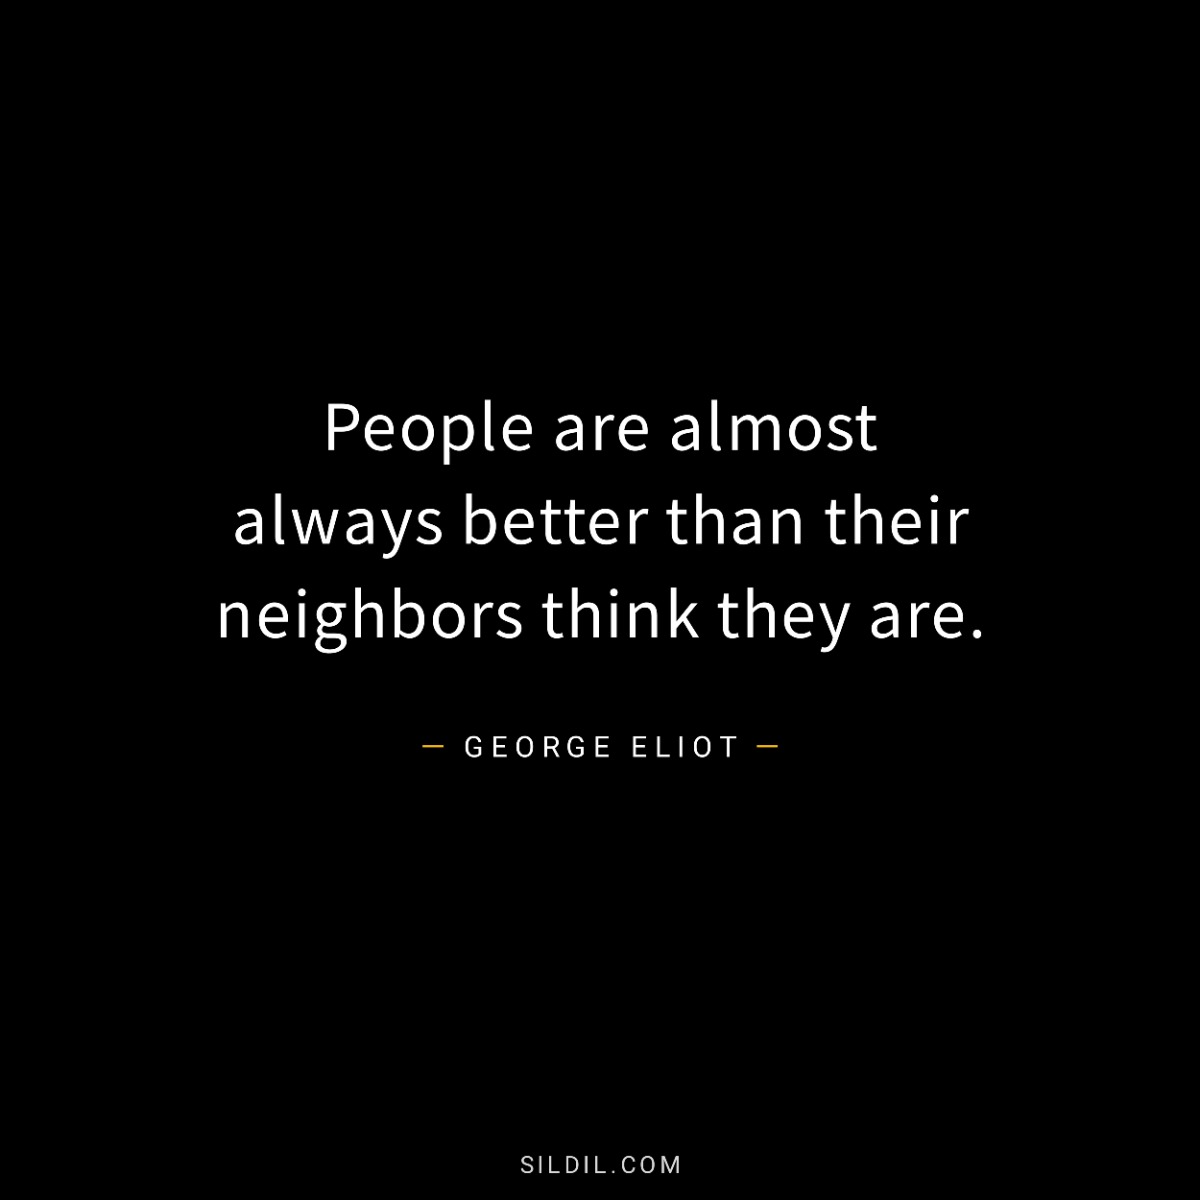 People are almost always better than their neighbors think they are.